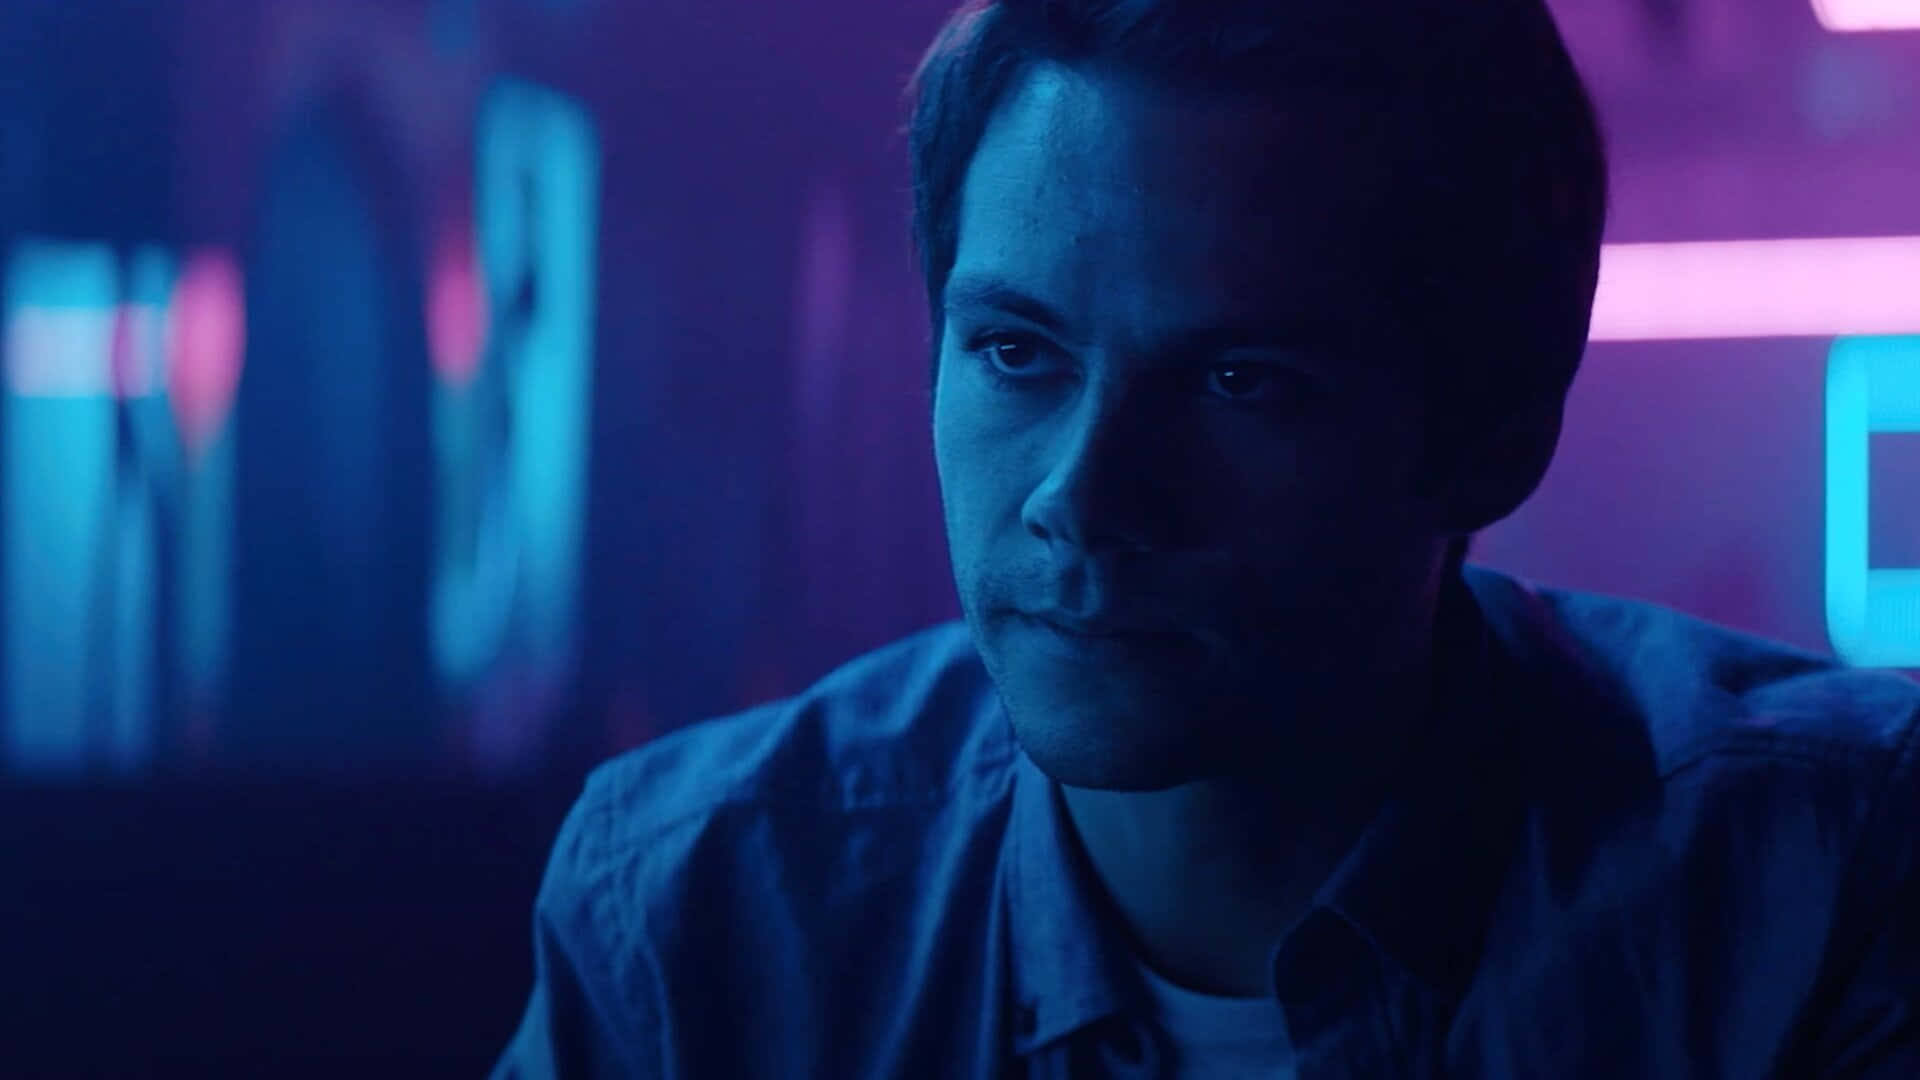 A Man In A Blue Shirt Is Staring At A Neon Light Wallpaper